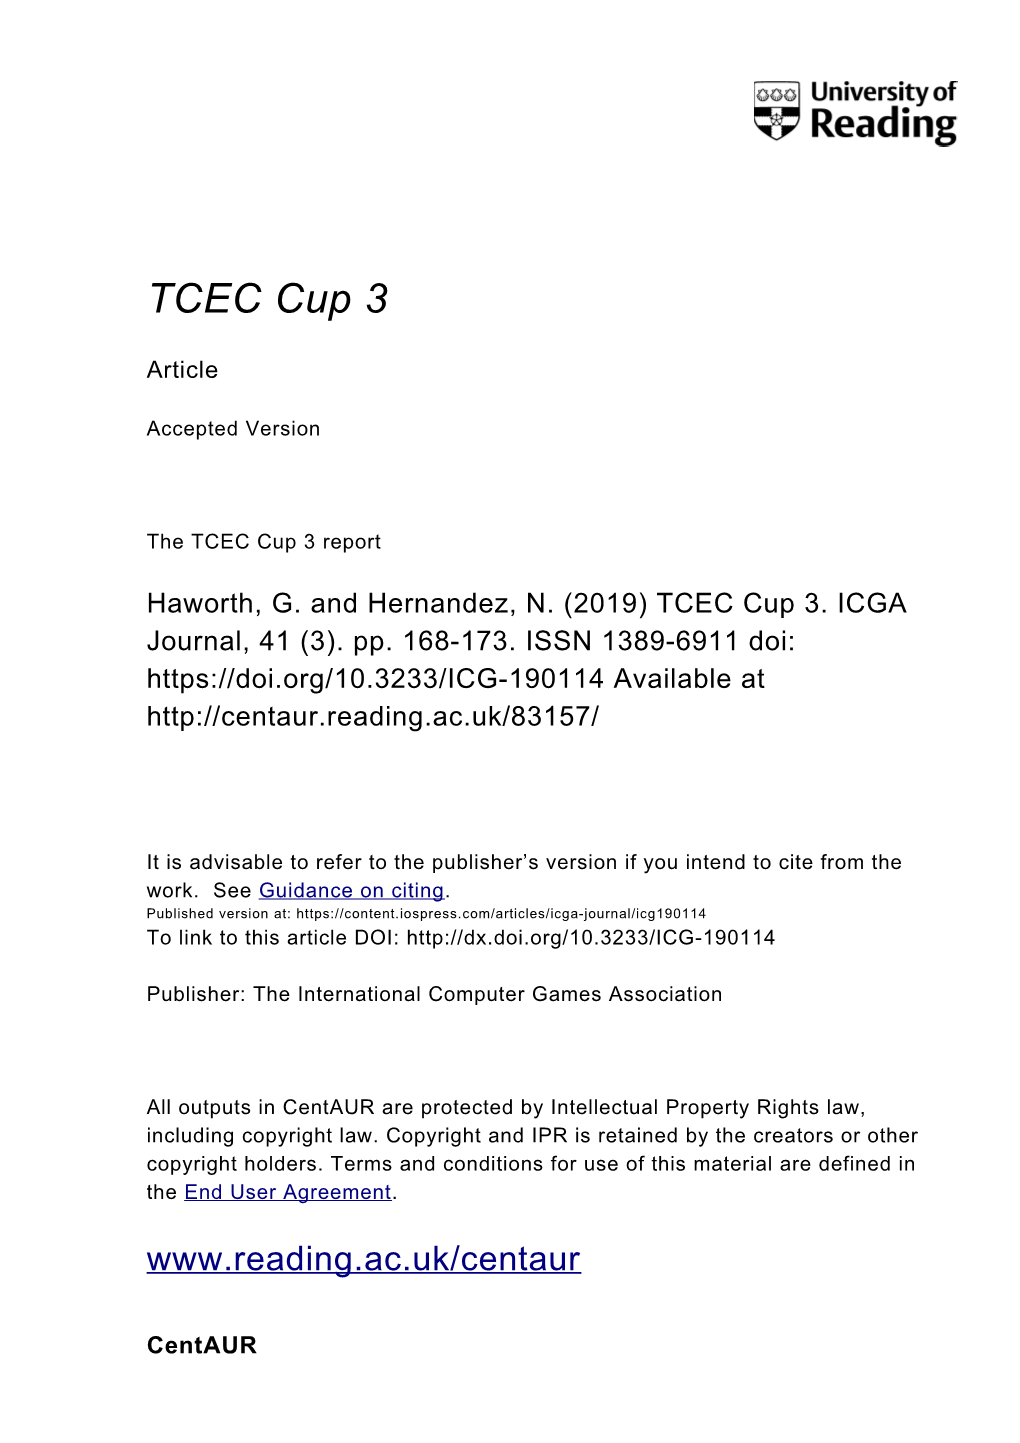 The TCEC Cup 3 Report